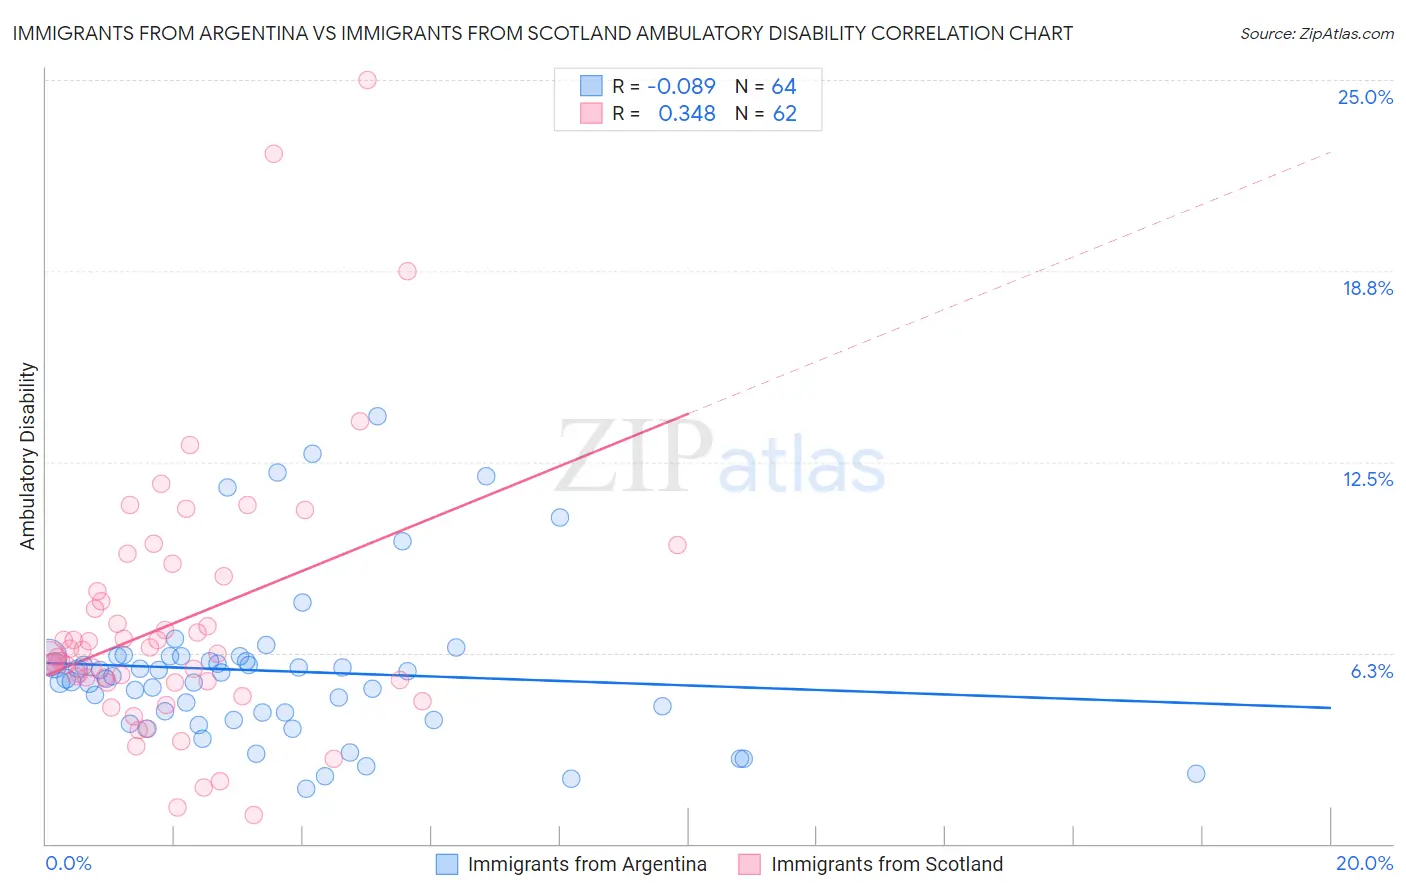 Immigrants from Argentina vs Immigrants from Scotland Ambulatory Disability